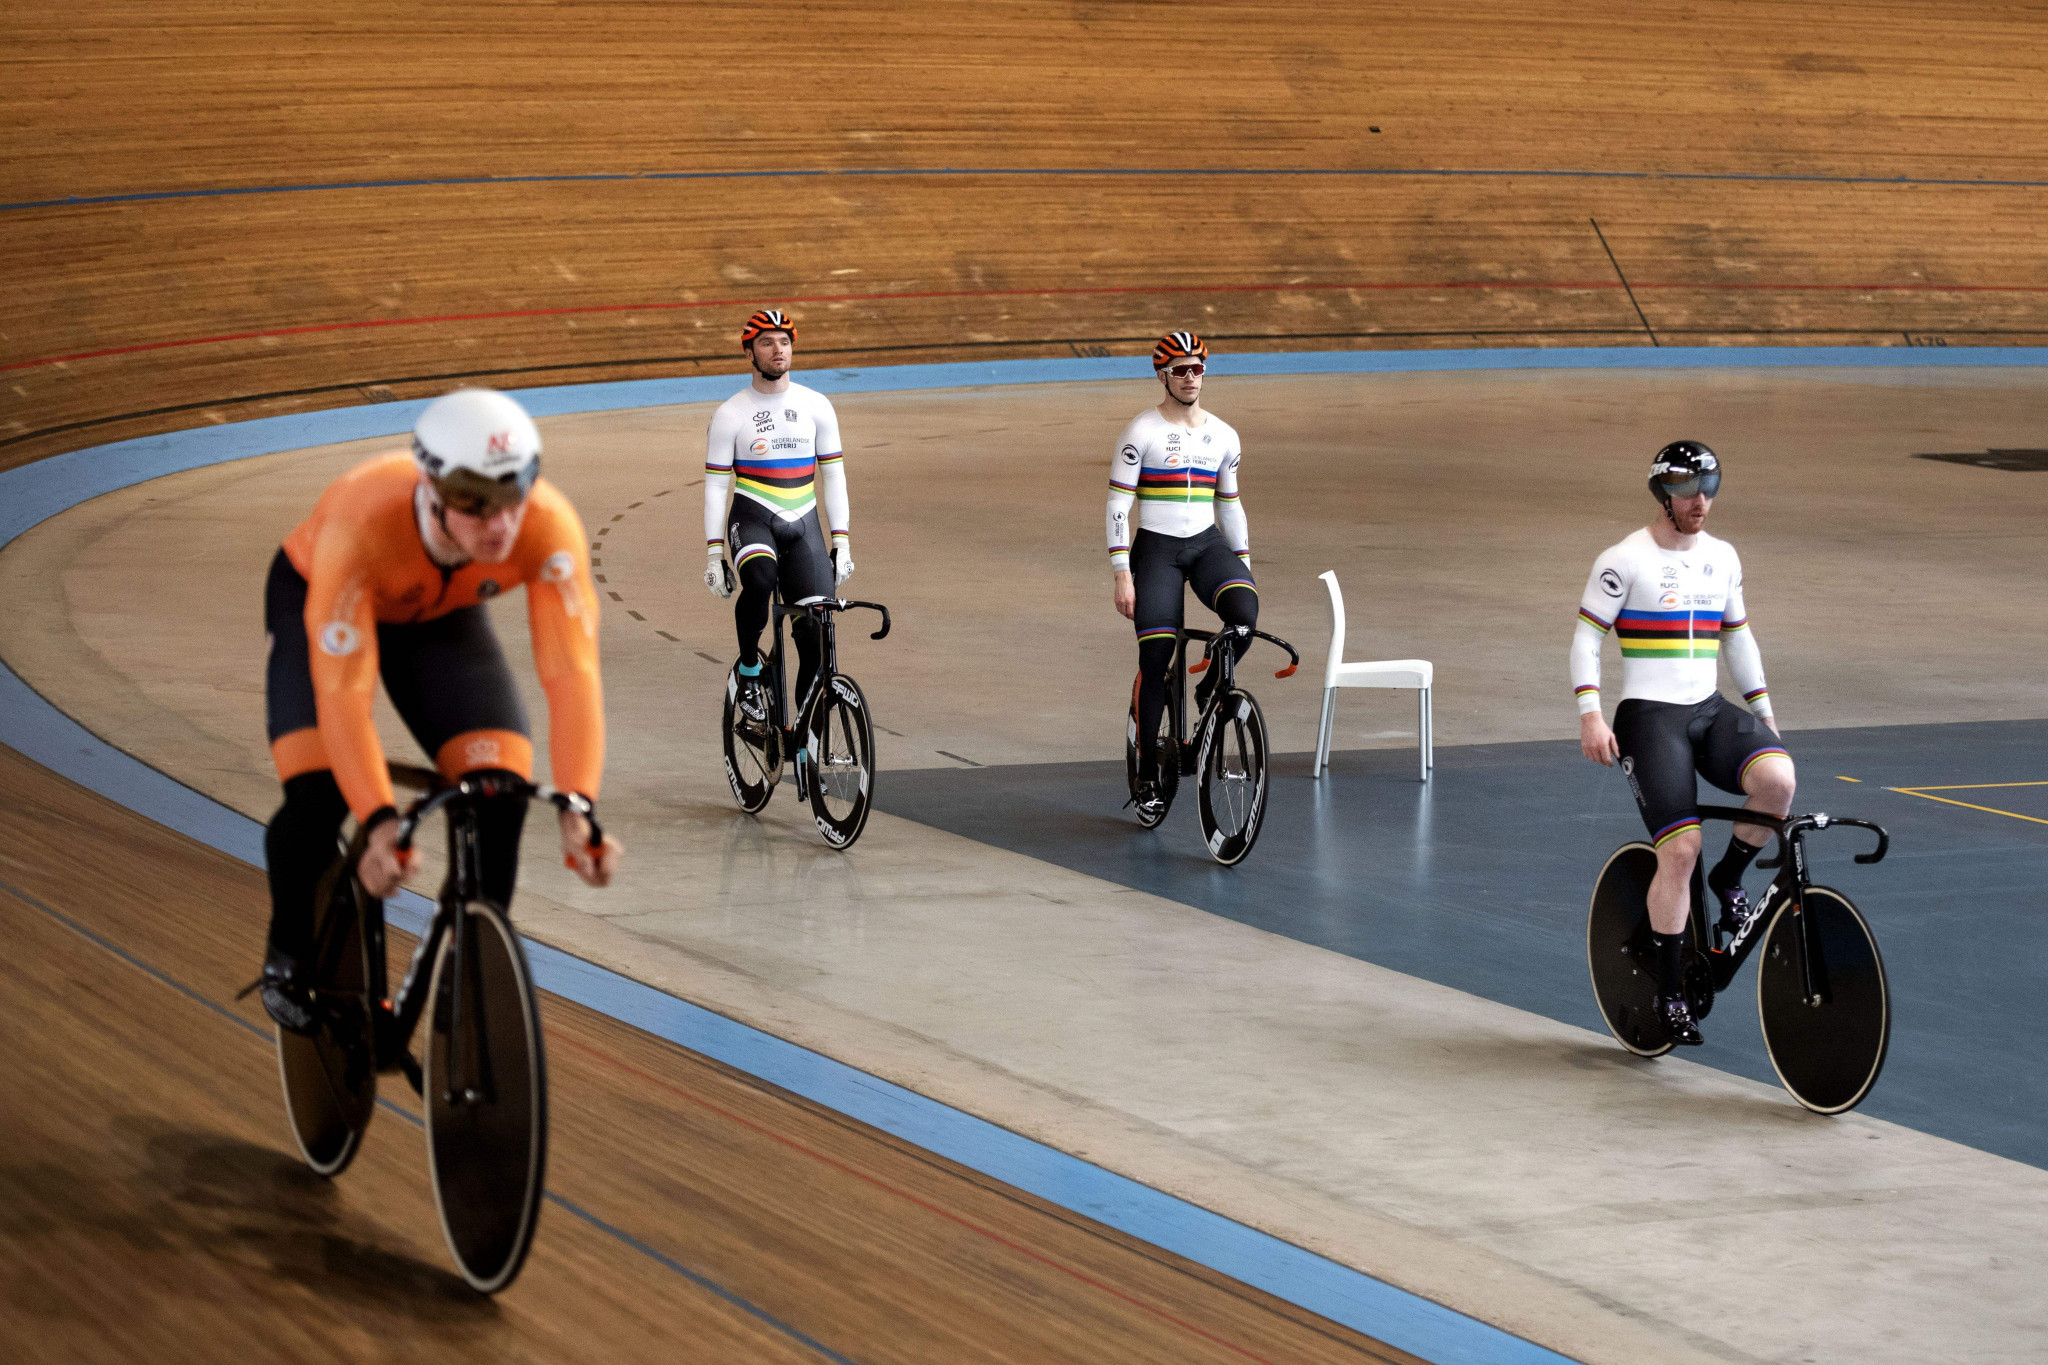 Berlin poised for UCI World Championships in final track test before